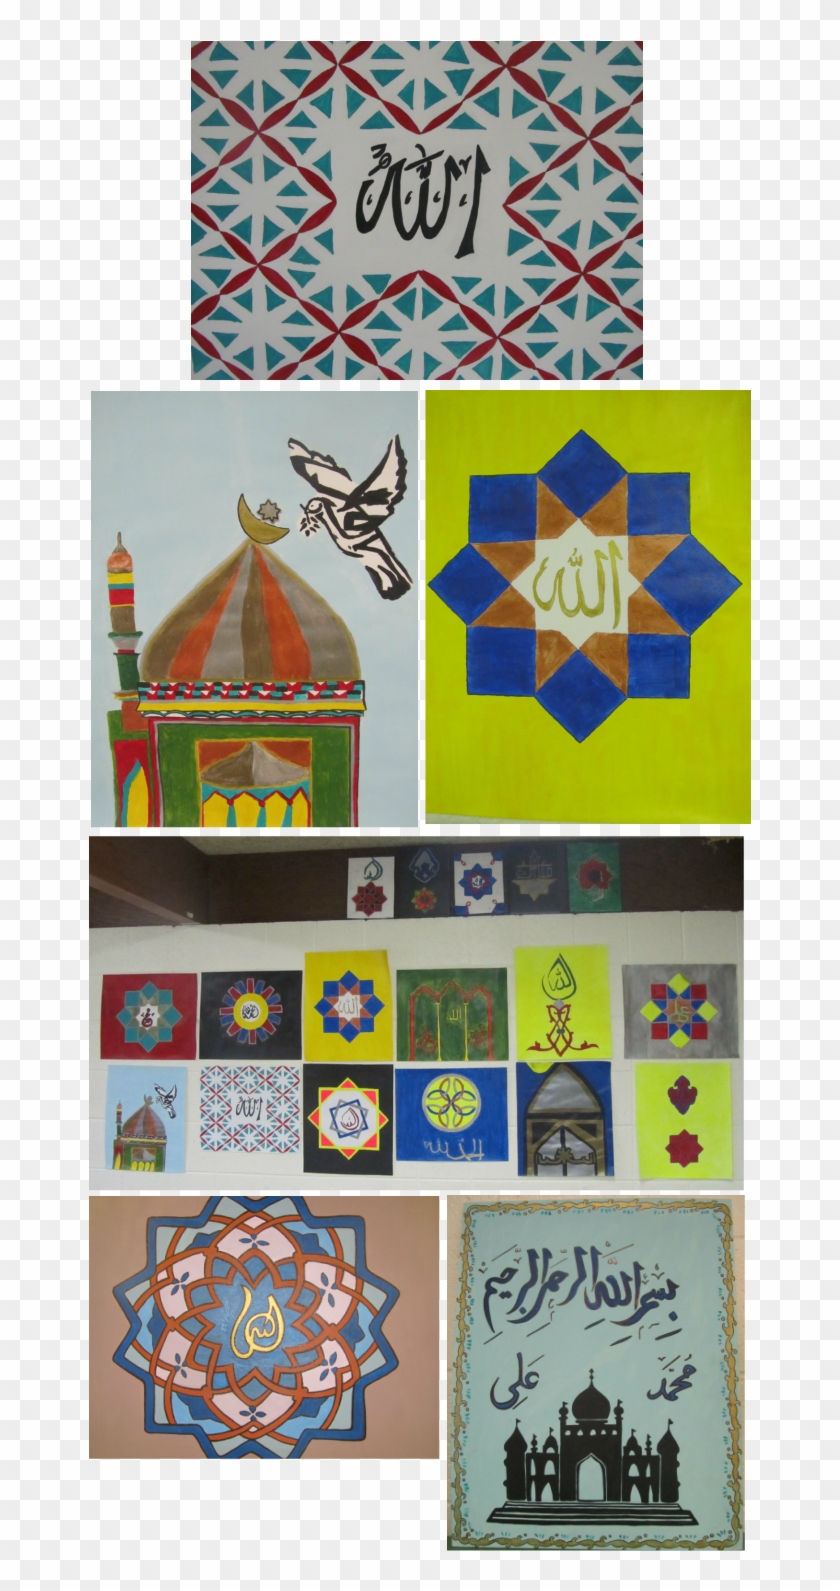 Islamic Art And Design At Wise Academy - Motif Clipart #3305184